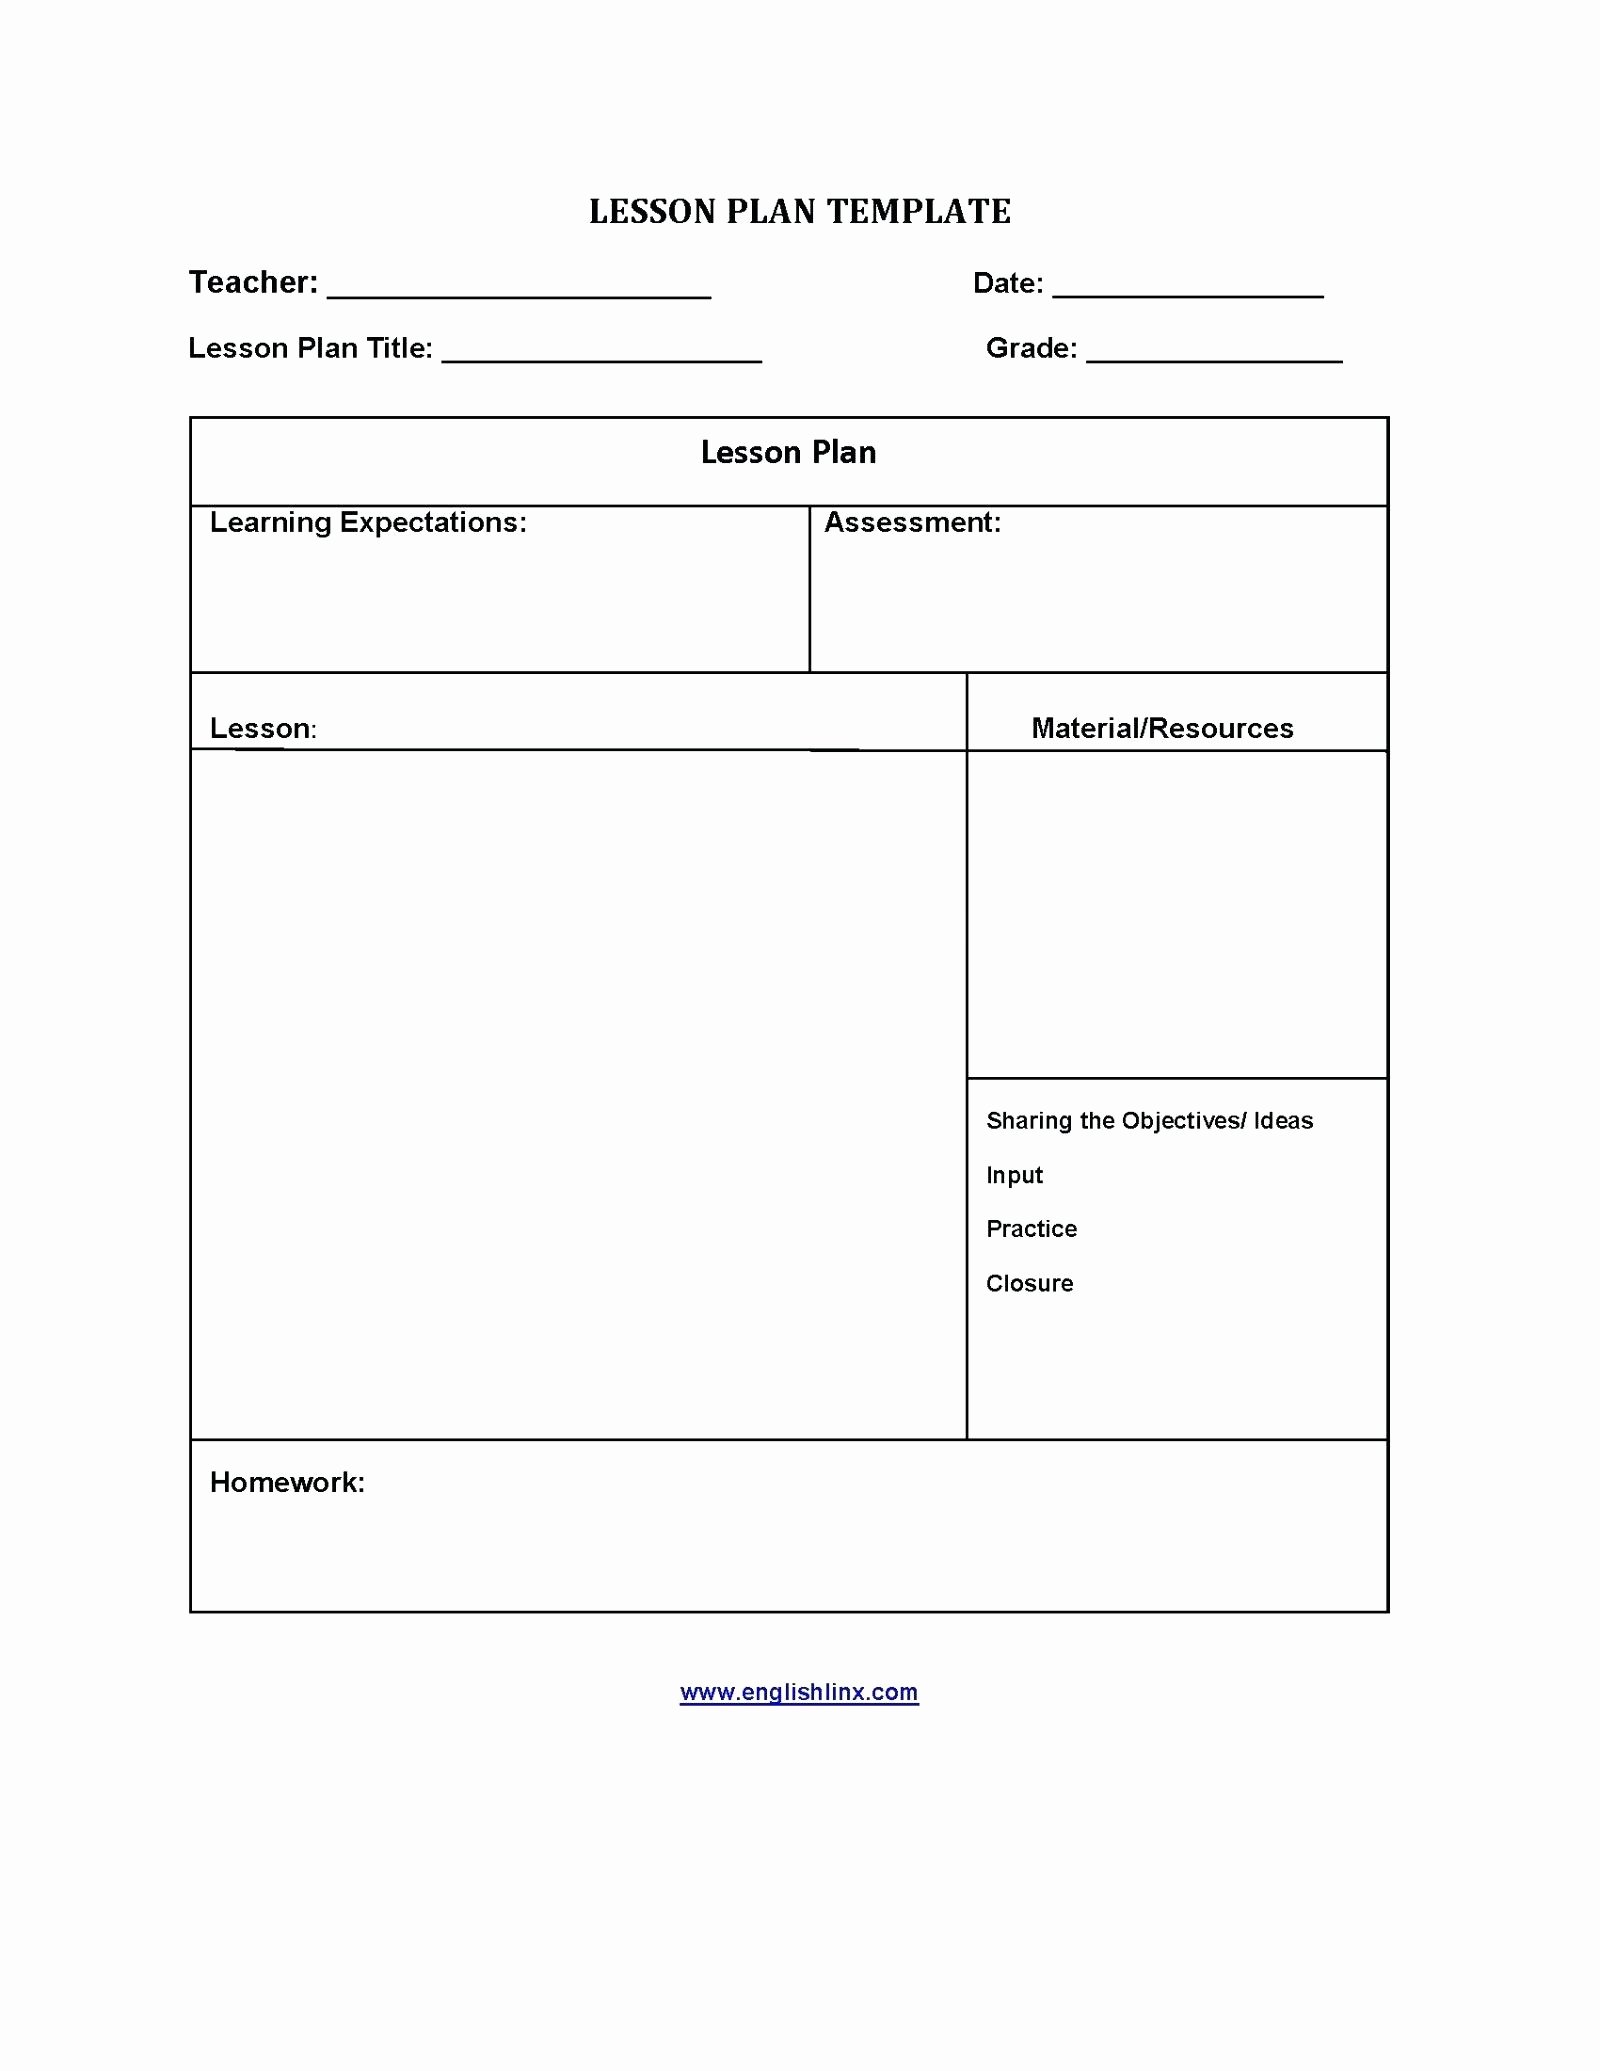 Siop Lesson Plan Template 3 Lovely Siop Lesson Plan Example 2nd Grade Lesson Plan Template 2